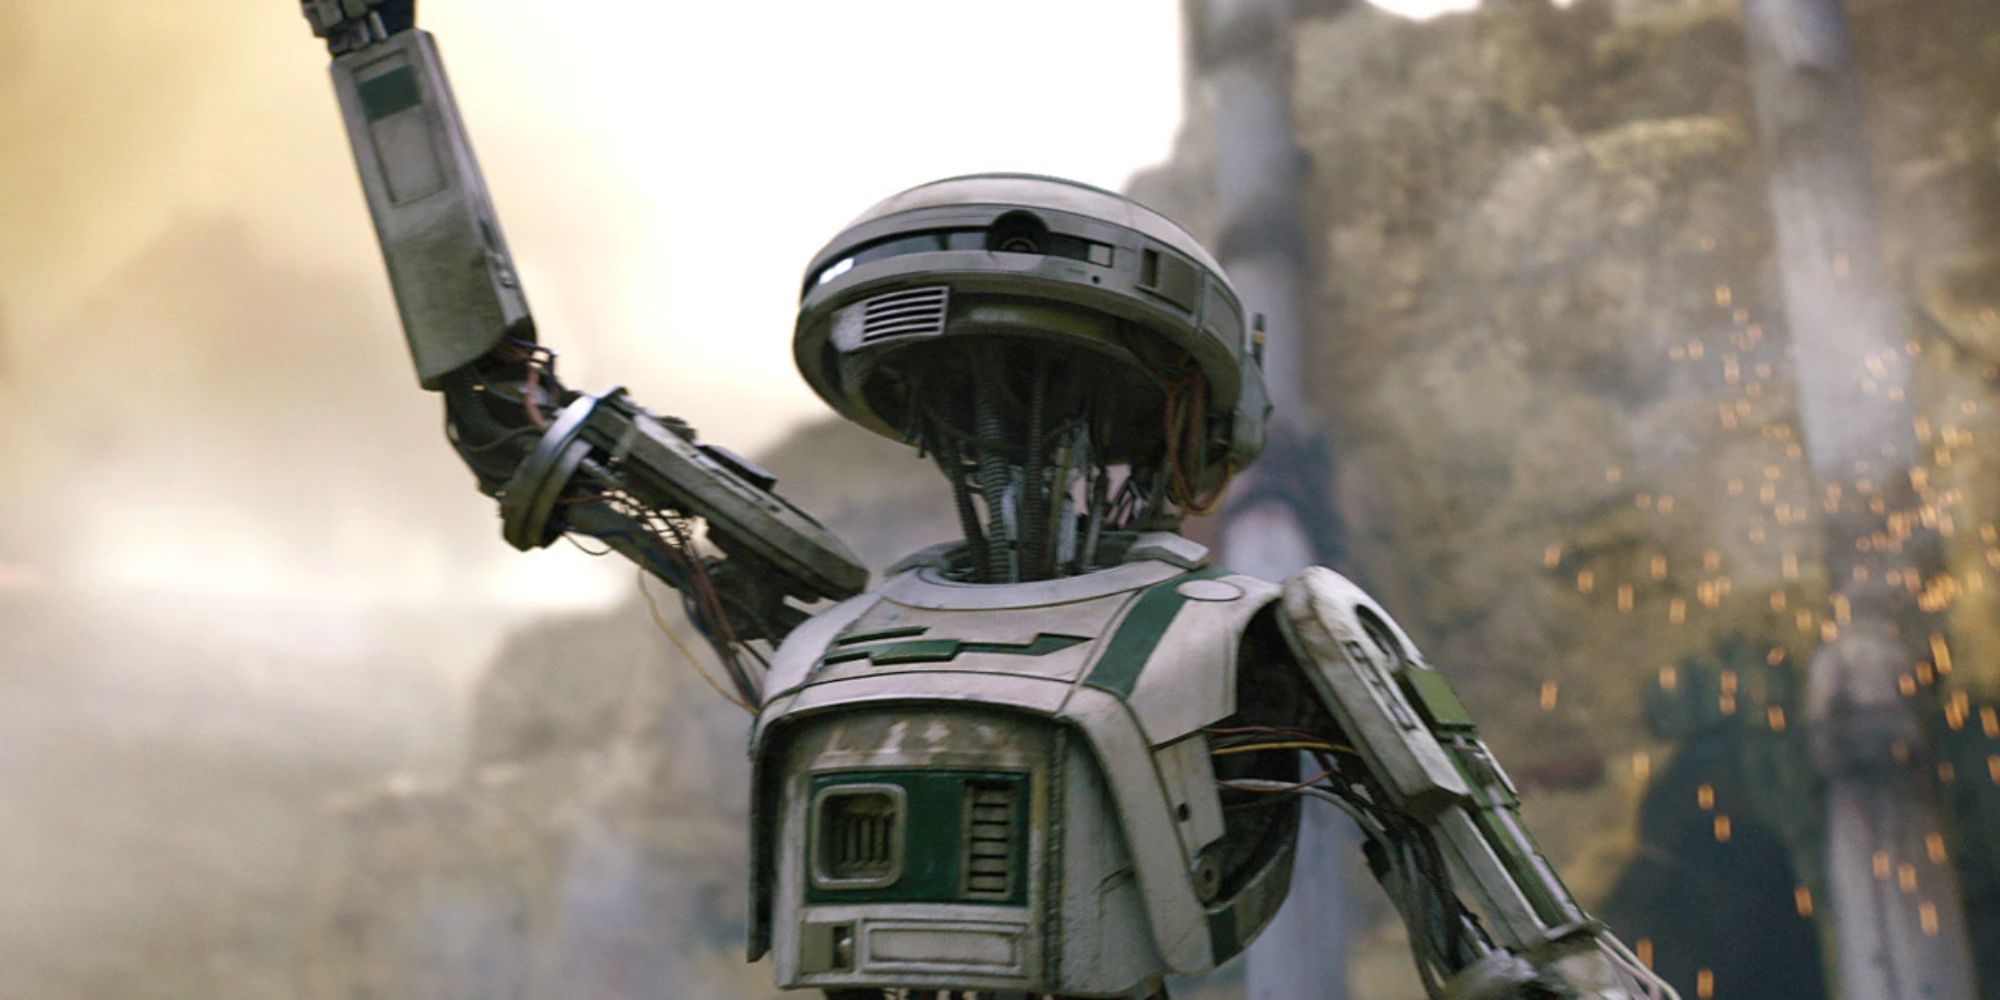 L3-37, voiced by Phoebe Waller-Bridge, takes a stand for her droid companions